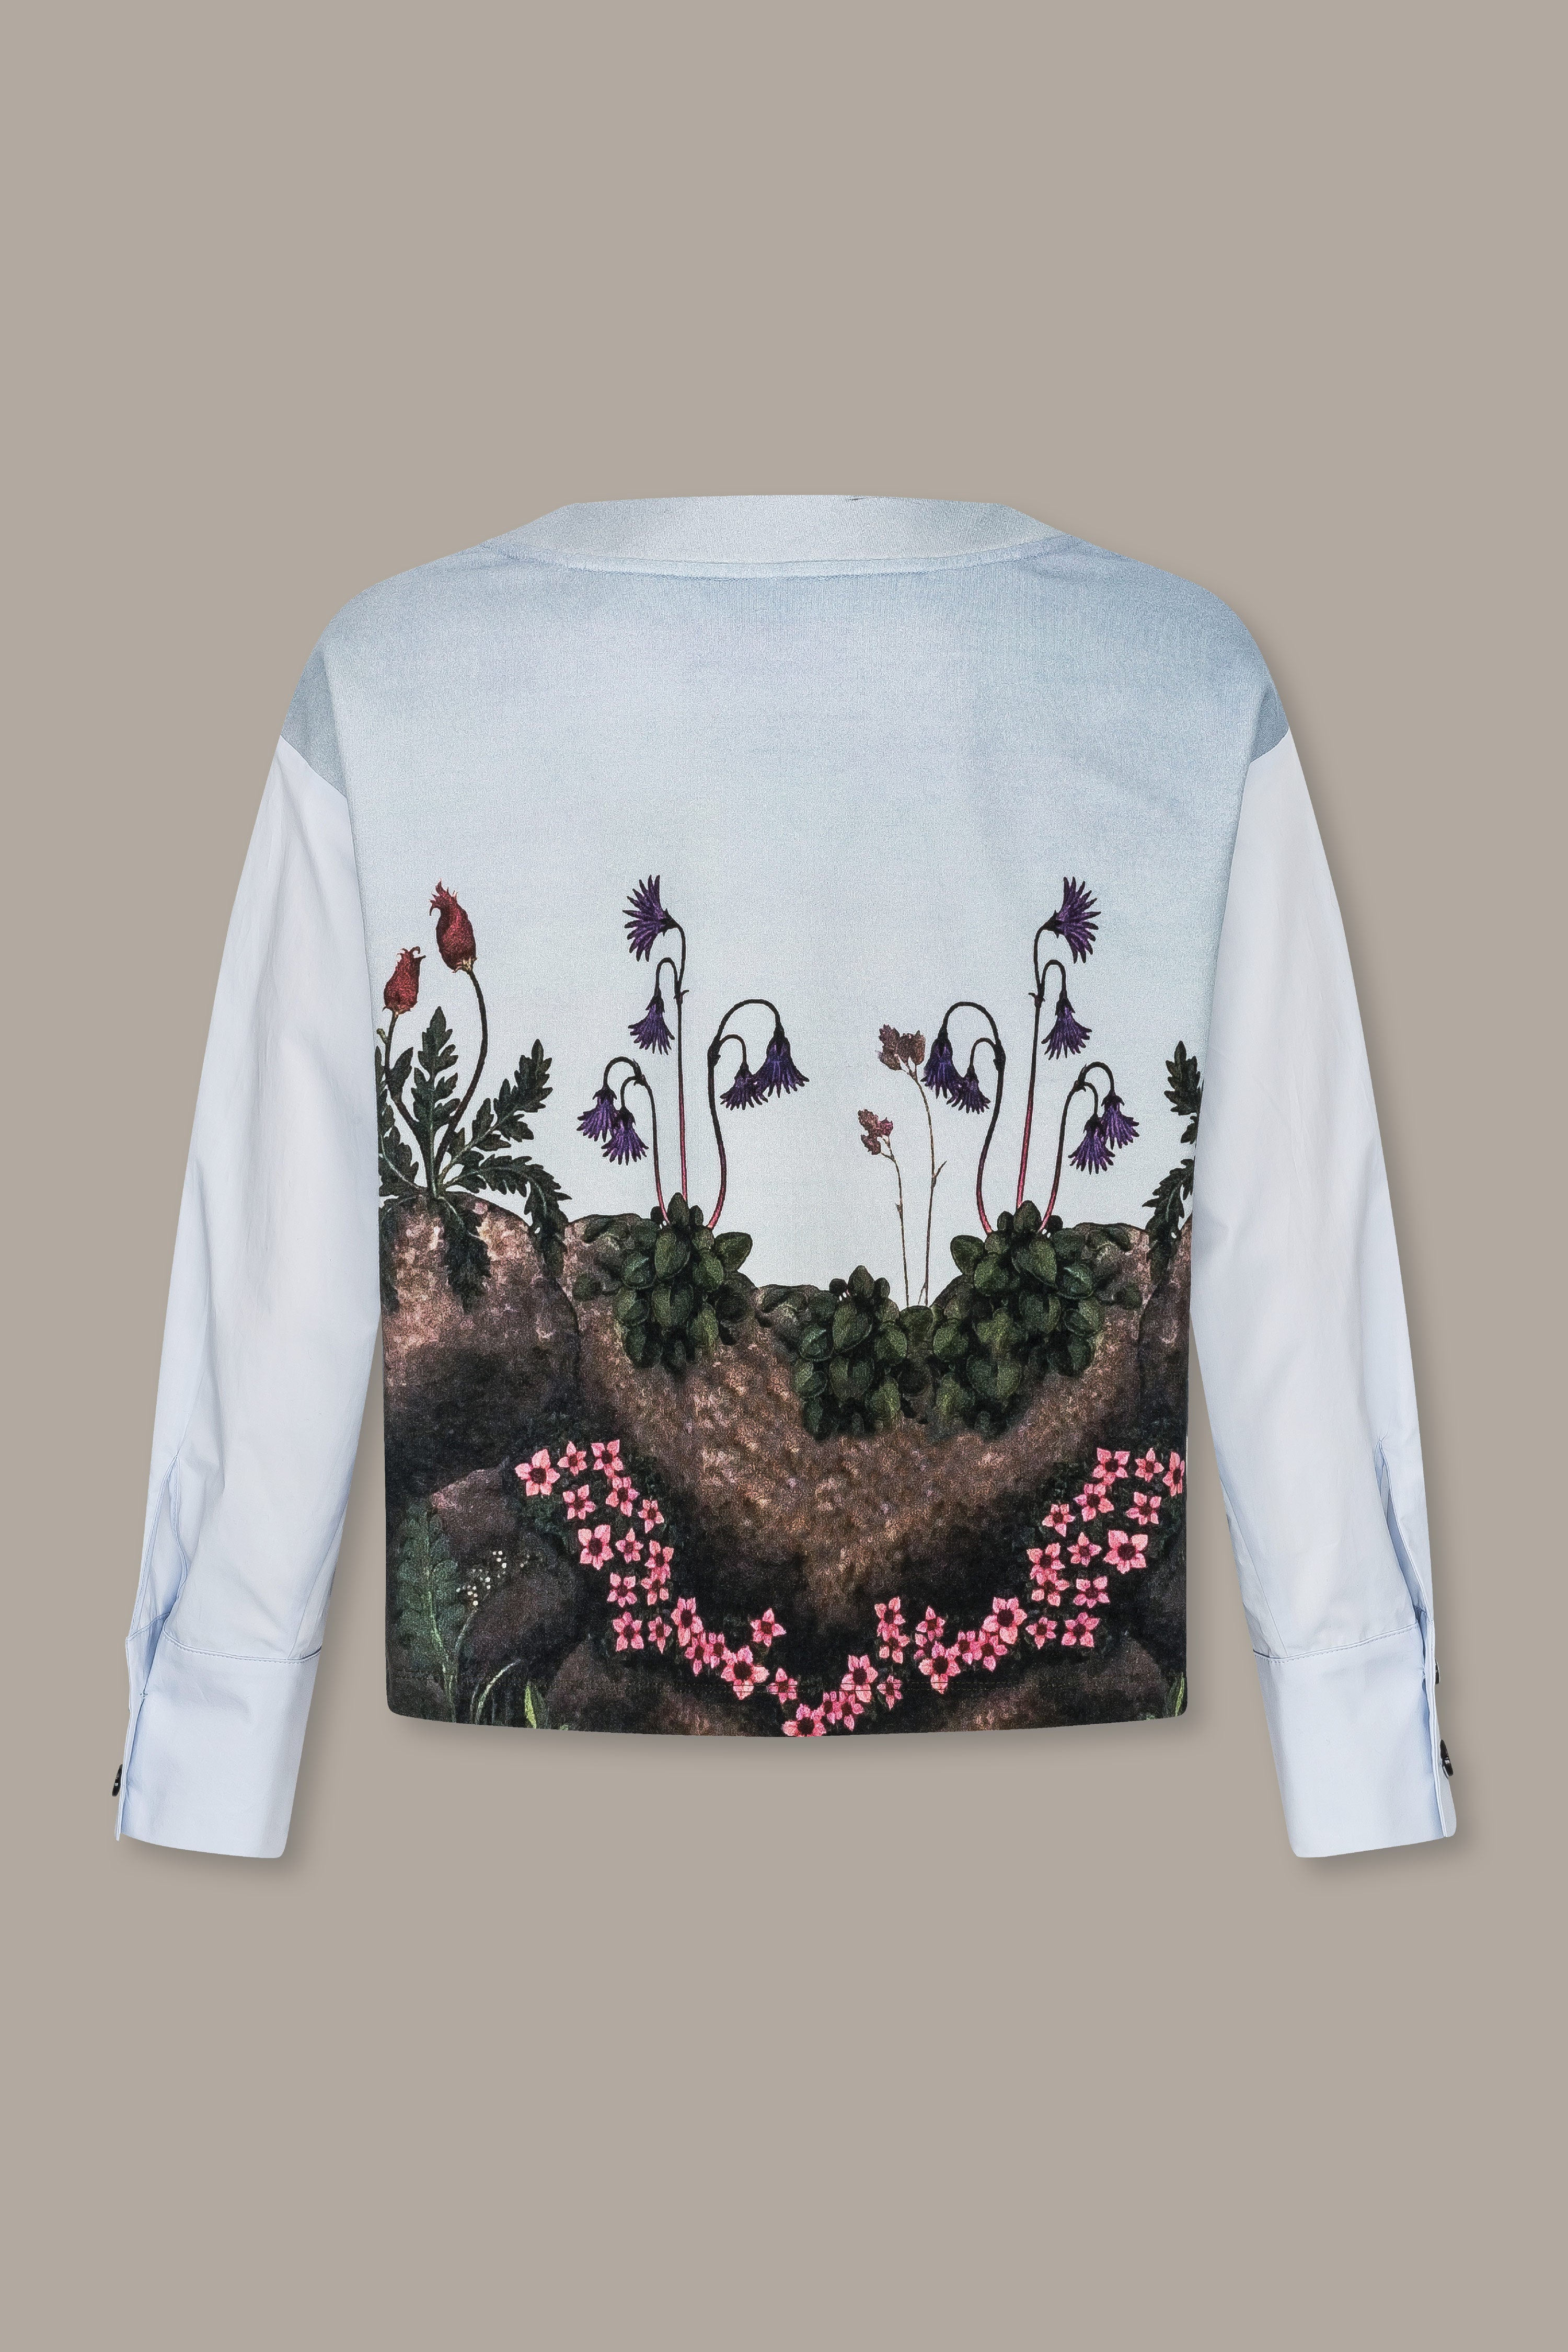 Blouse sweatshirt with a print